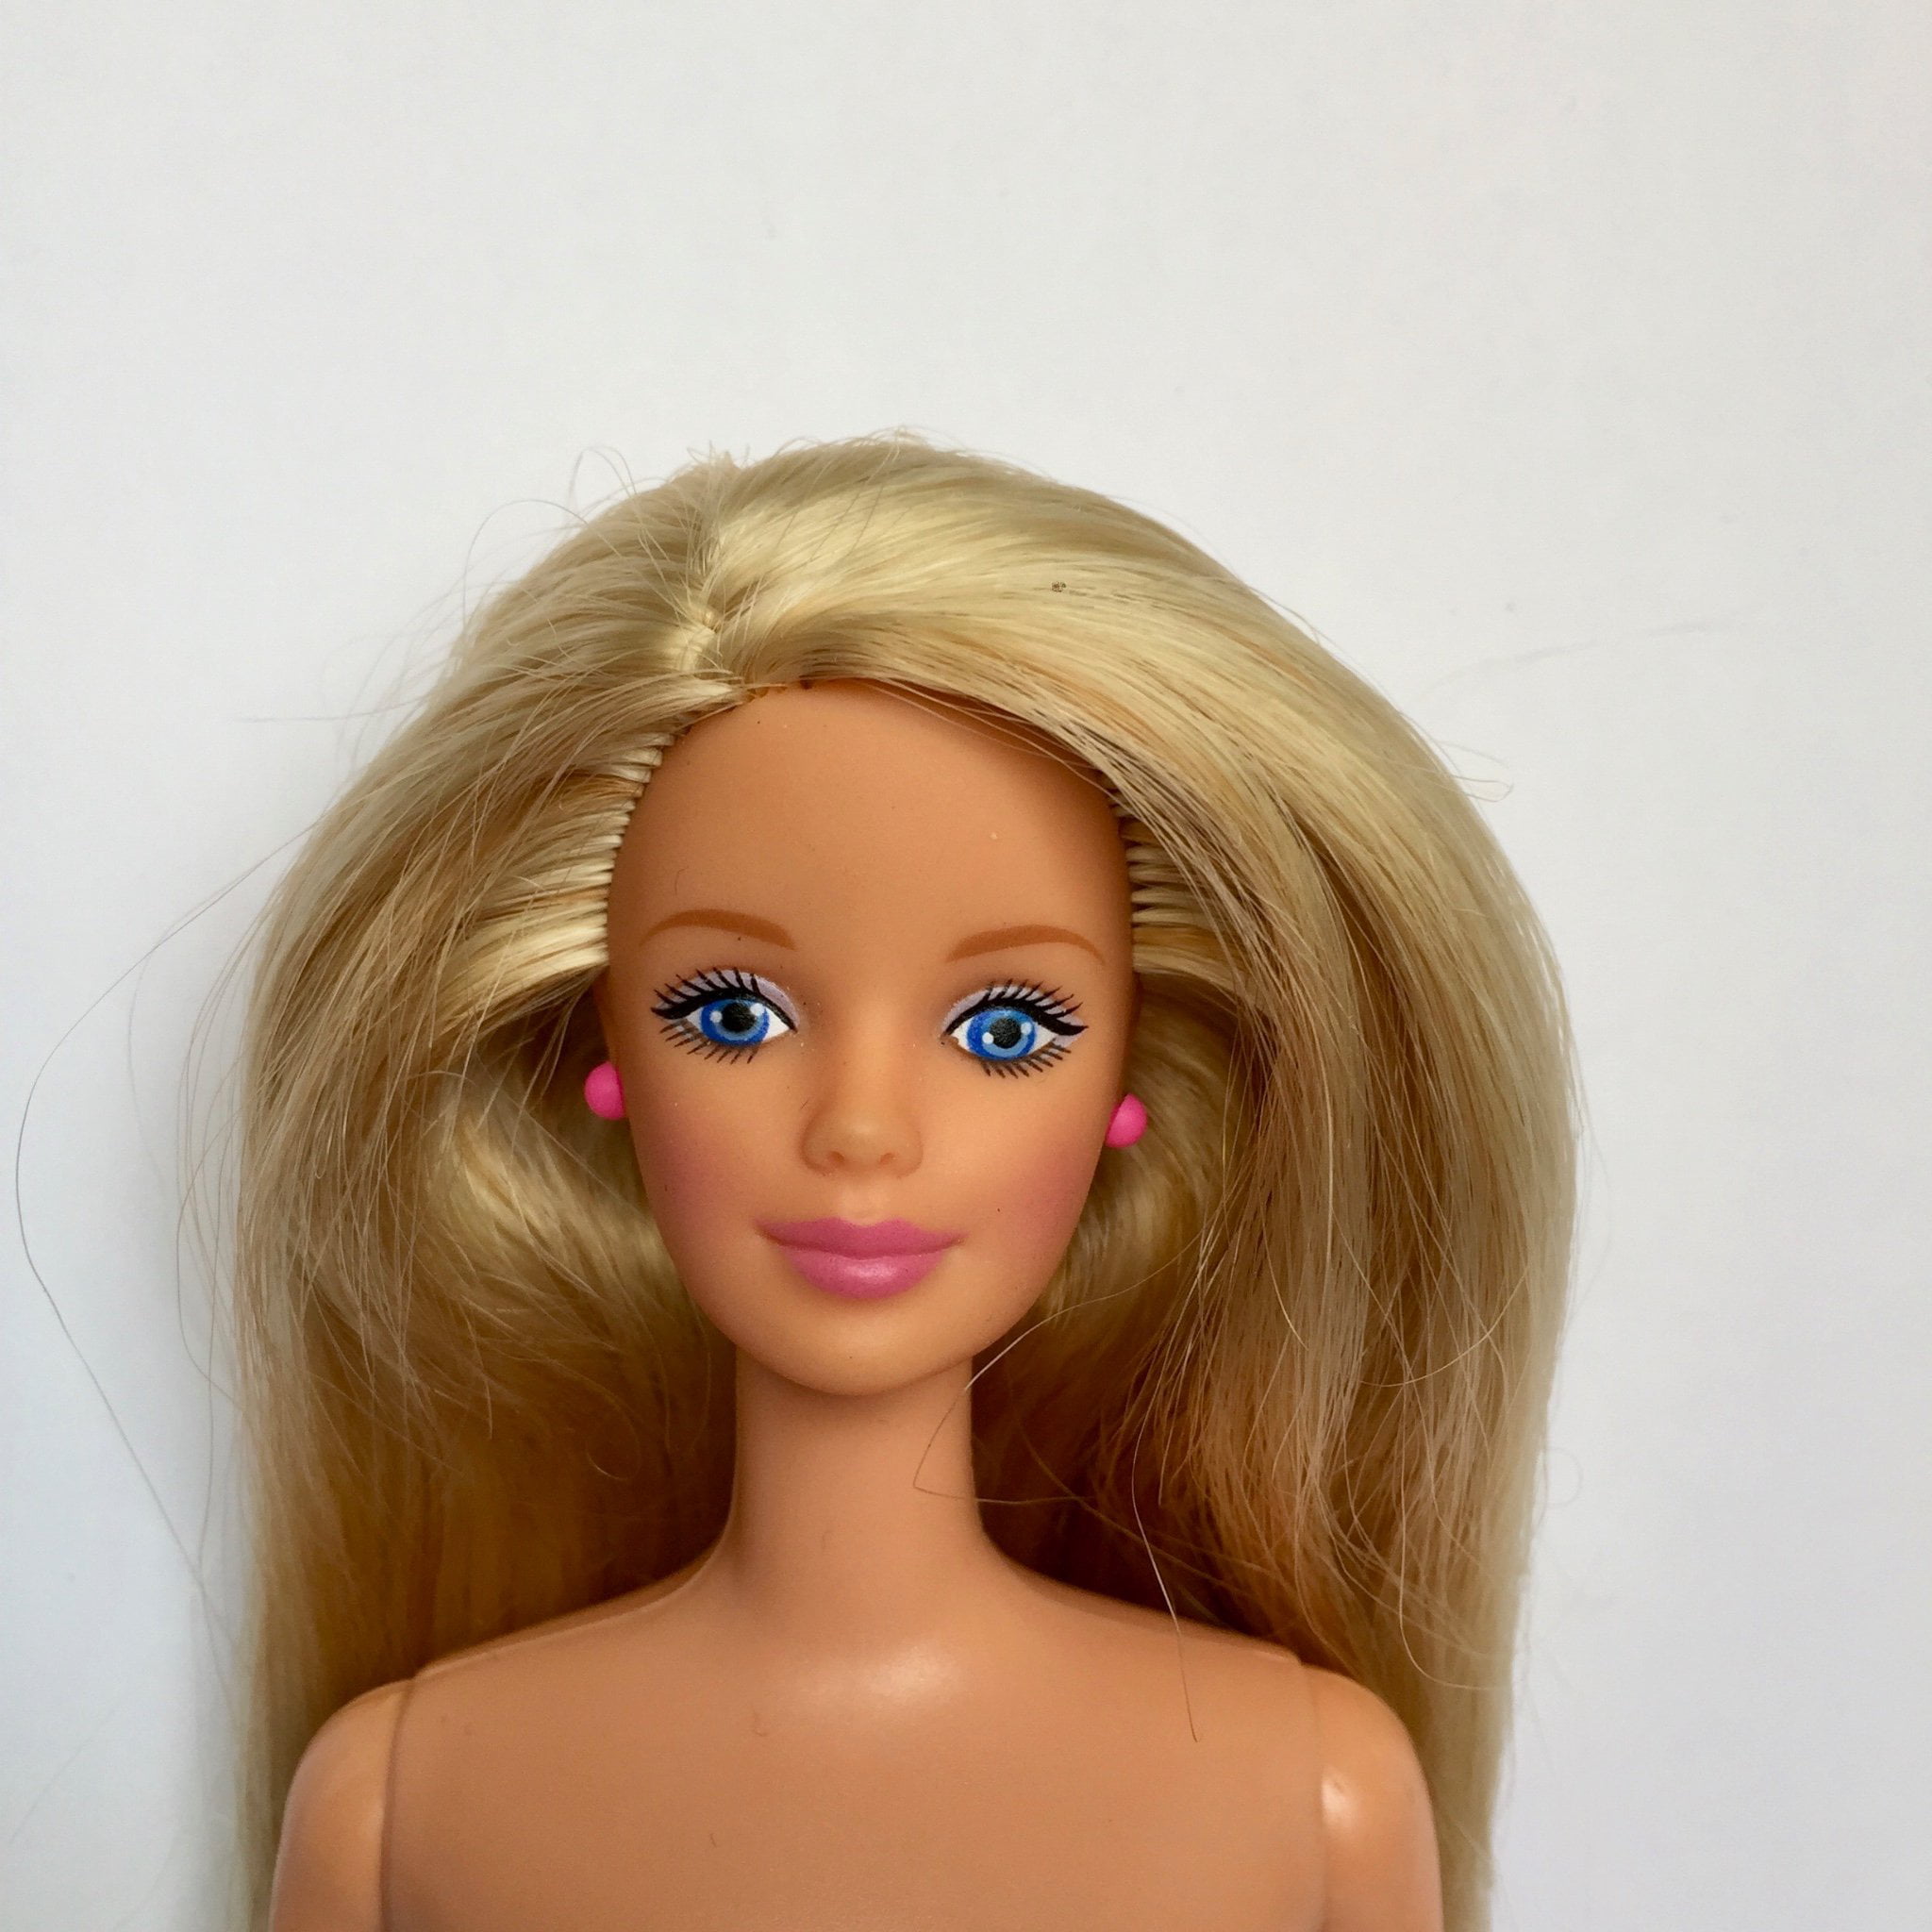 Dolls Toys And Hobbies Barbie Contemporary 1973 Now Gorgeous Face Nude Doll Only Nude